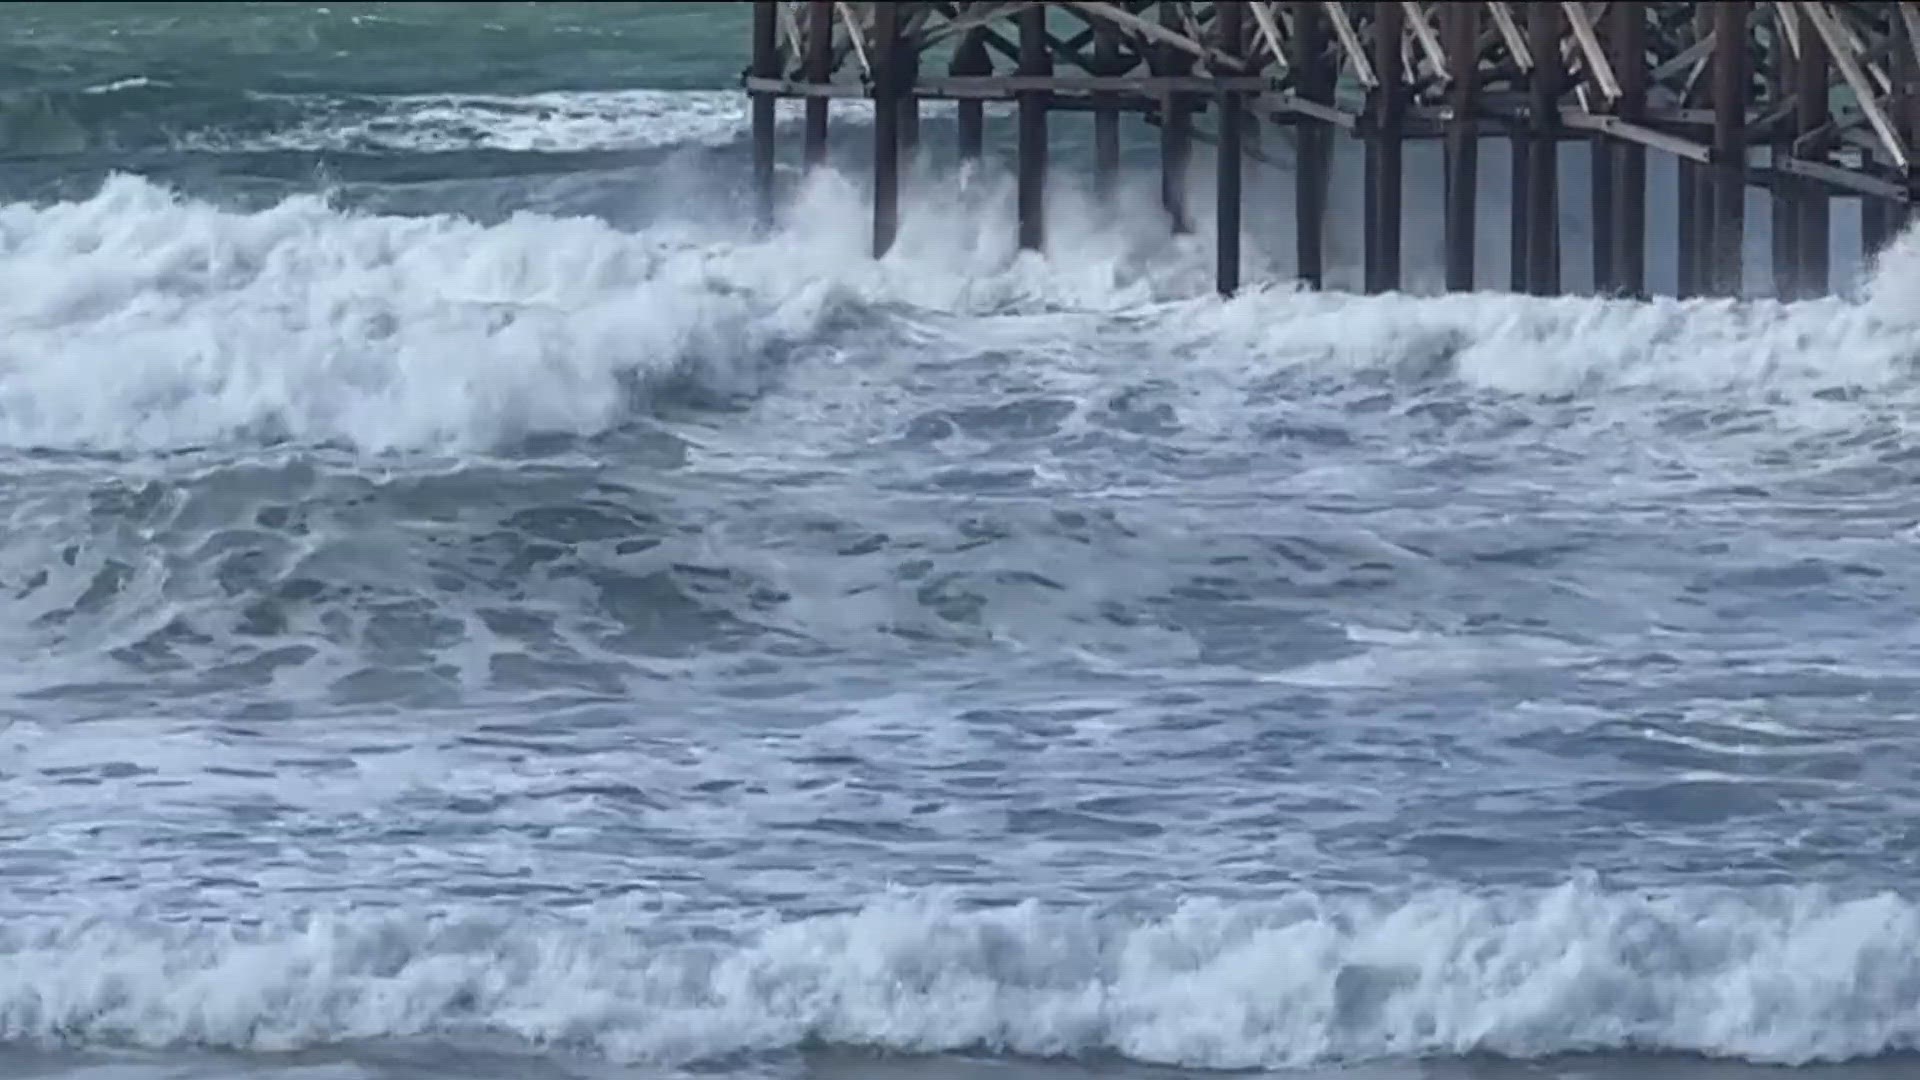 High surf and winds expected at San Diego beaches for Hurricane Hilary